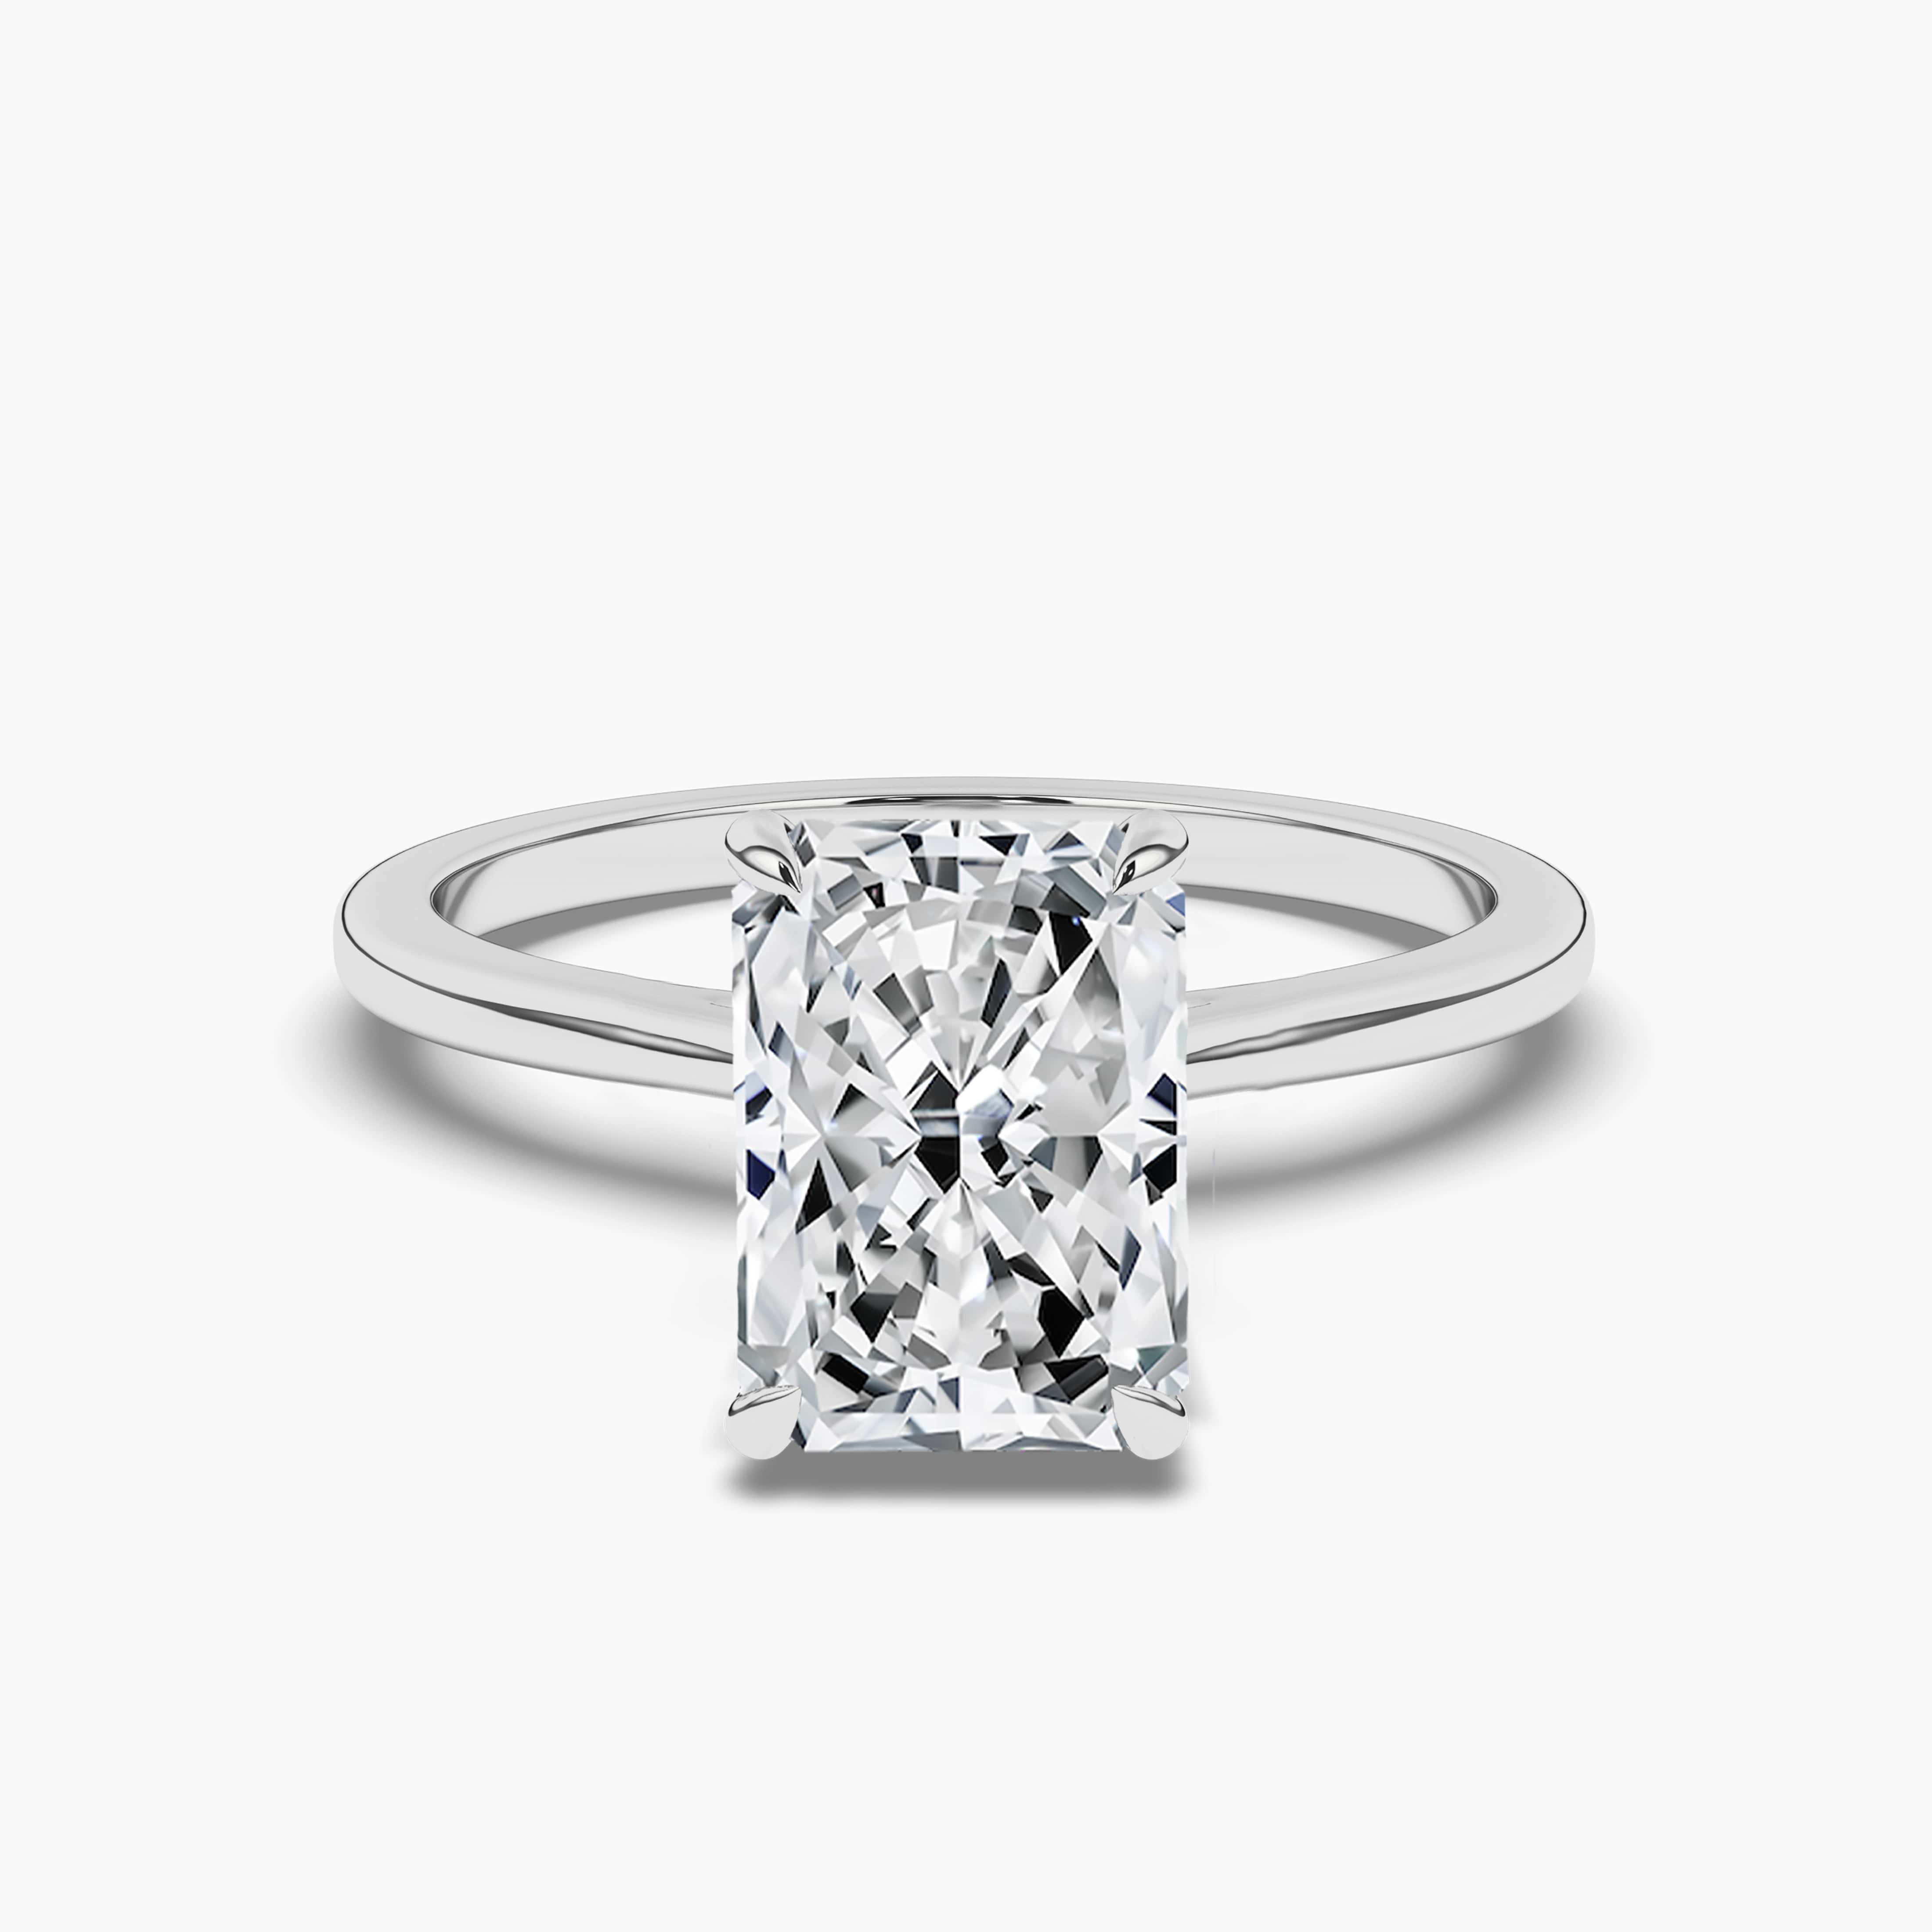 Radiant diamond solitaire engagement ring set in white gold